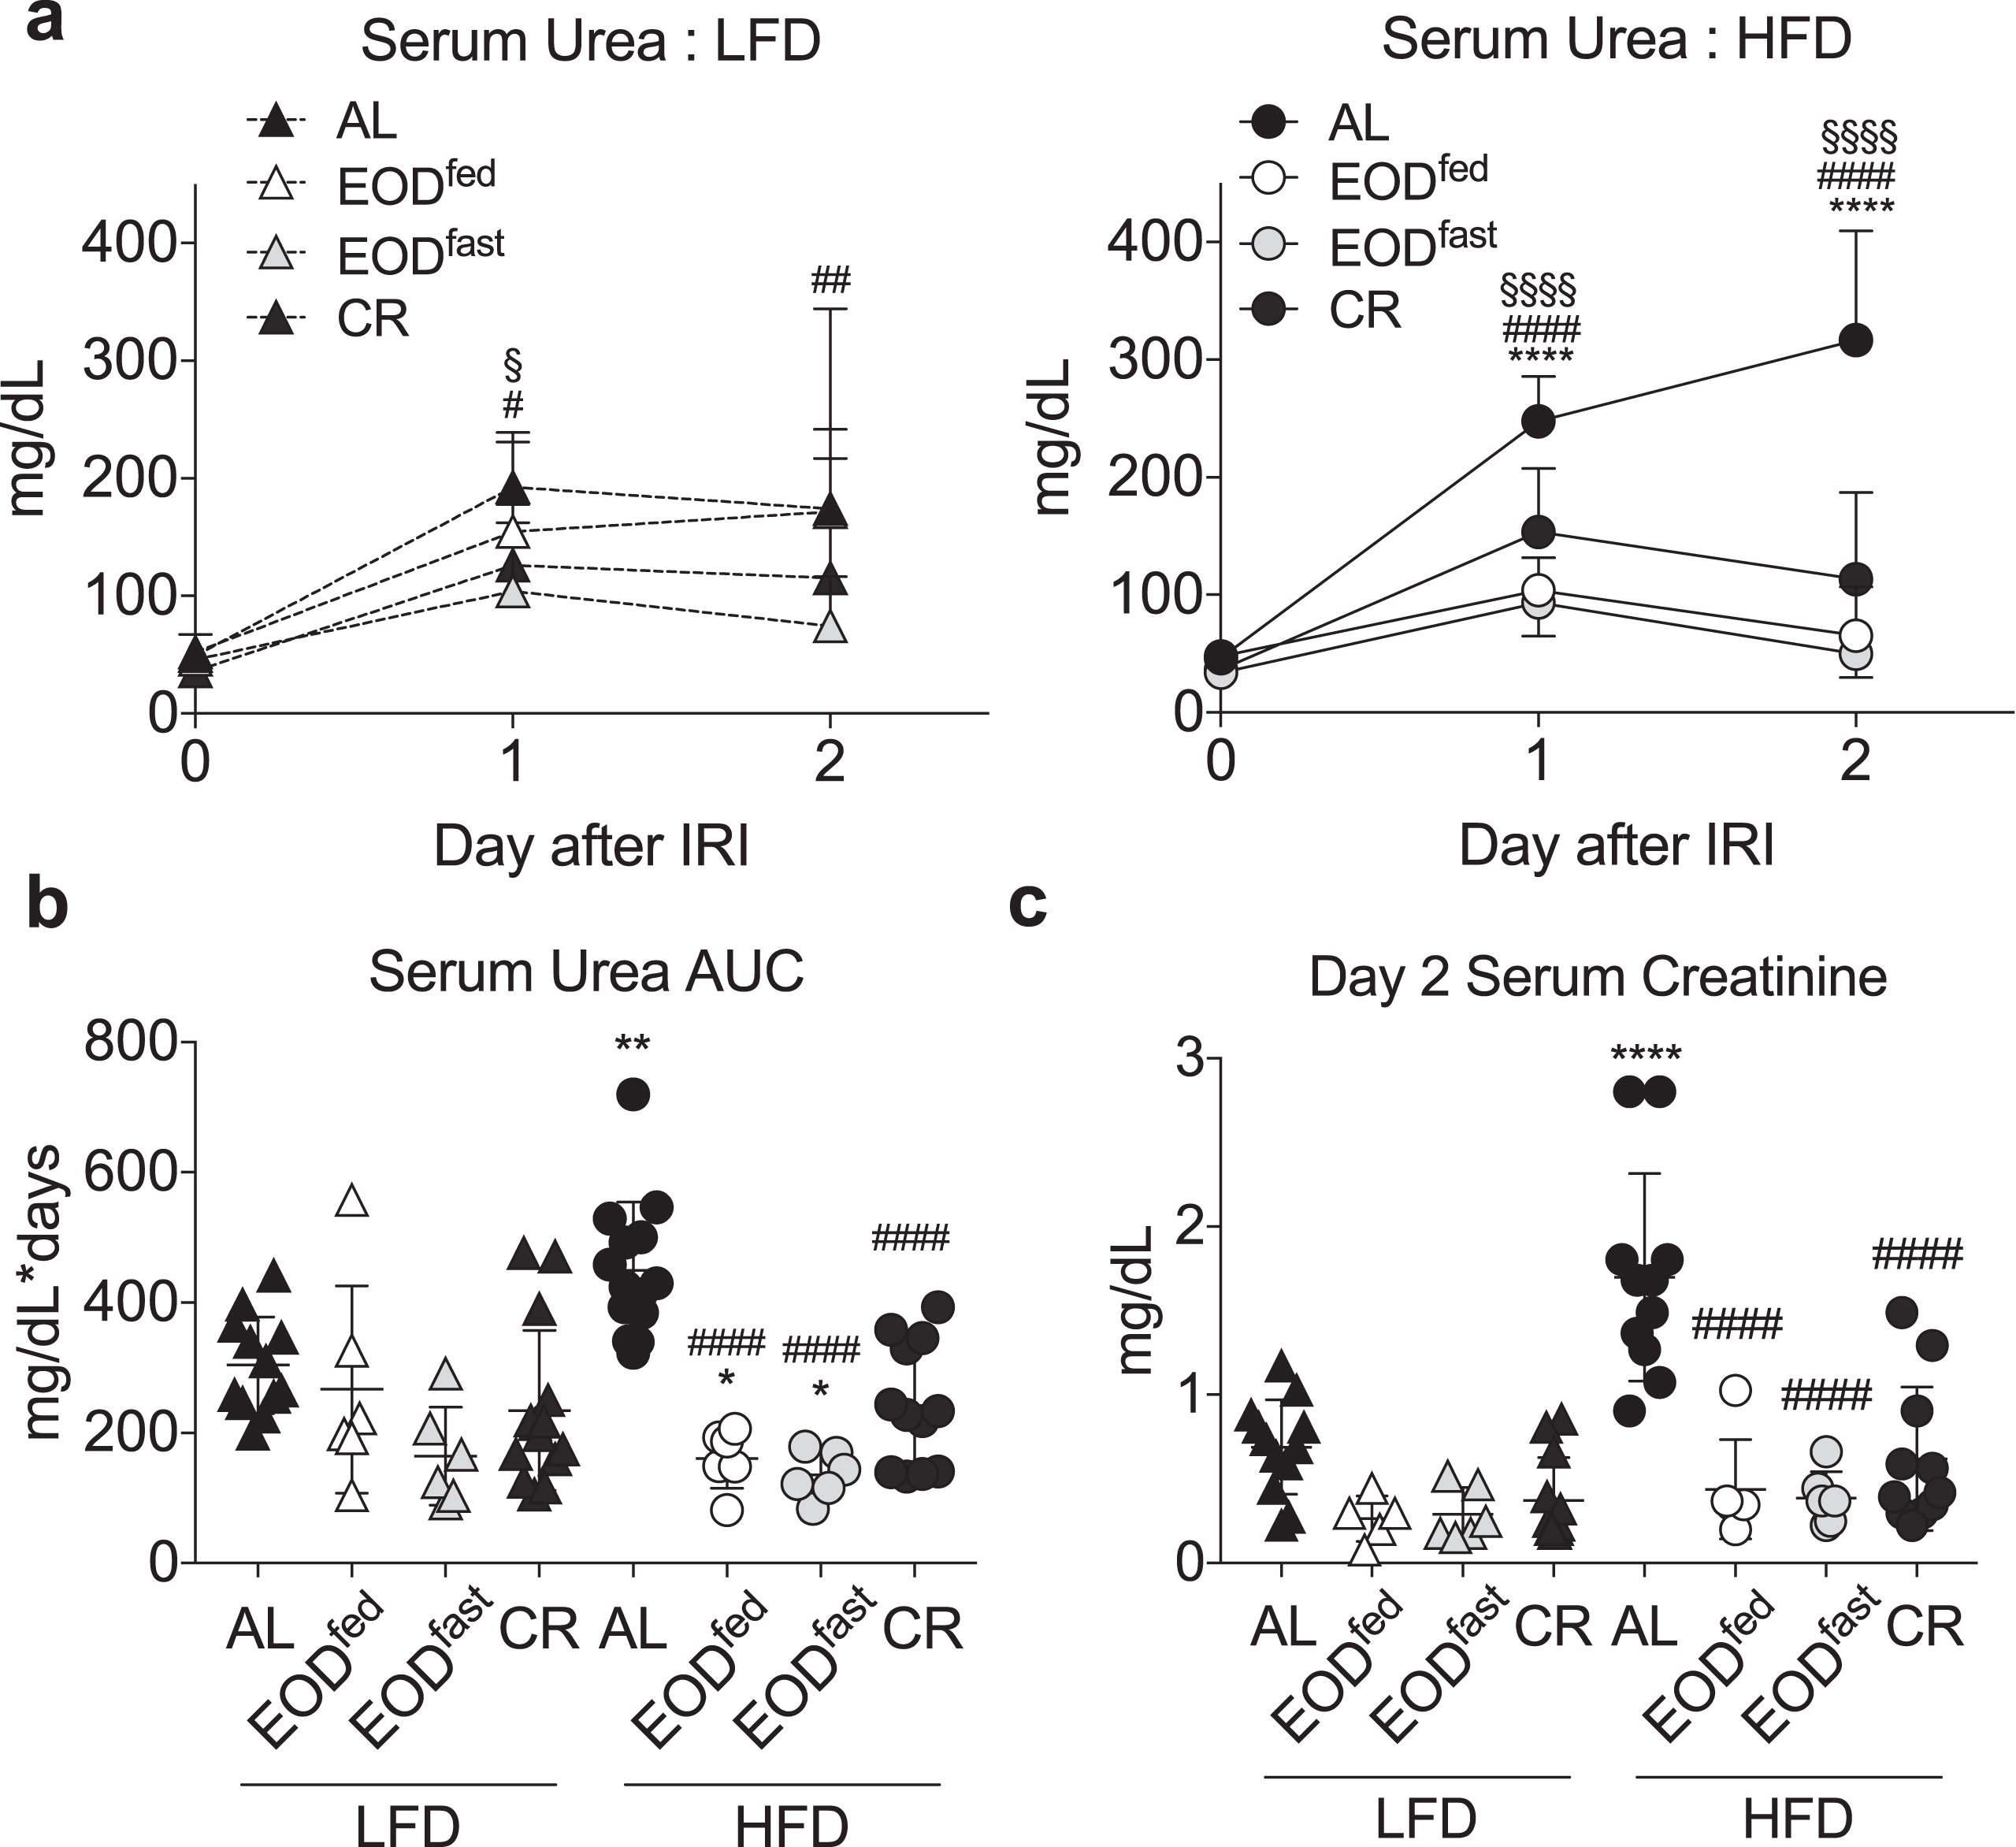 Effects of EOD fed or fasted day on susceptibility to renal ischemia reperfusion injury. (a-c) Serum urea over the first 2 days following renal ischemia reperfusion injury in mice preconditioned for 6 weeks on the indicated diet and feeding regimen. (a) Daily serum urea in the indicated diet groups (LFD, left; HFD, right). Asterisk: AL vs. EODfed; pound sign: AL vs. EODfast; squiggle: AL vs. CR using repeated measures two-way ANOVA within diet with a Dunnett’s post-hoc test. (b) Area under the curve (AUC) of serum urea from (a). (c) Serum creatinine on day 2 after surgery. (b, c) Asterisk: comparison of all groups to AL LFD; pound sign: comparison of HFD groups to AL HFD using one-way ANOVA with a Sidak’s post-hoc test. */#/‡/§P < 0.05, **/# #/‡‡/§§P < 0.01, ***/# # #/‡‡‡/§§§P < 0.001, ****/# # # #/‡‡‡‡/§§§§P < 0.0001. All data are expressed as mean±SD.